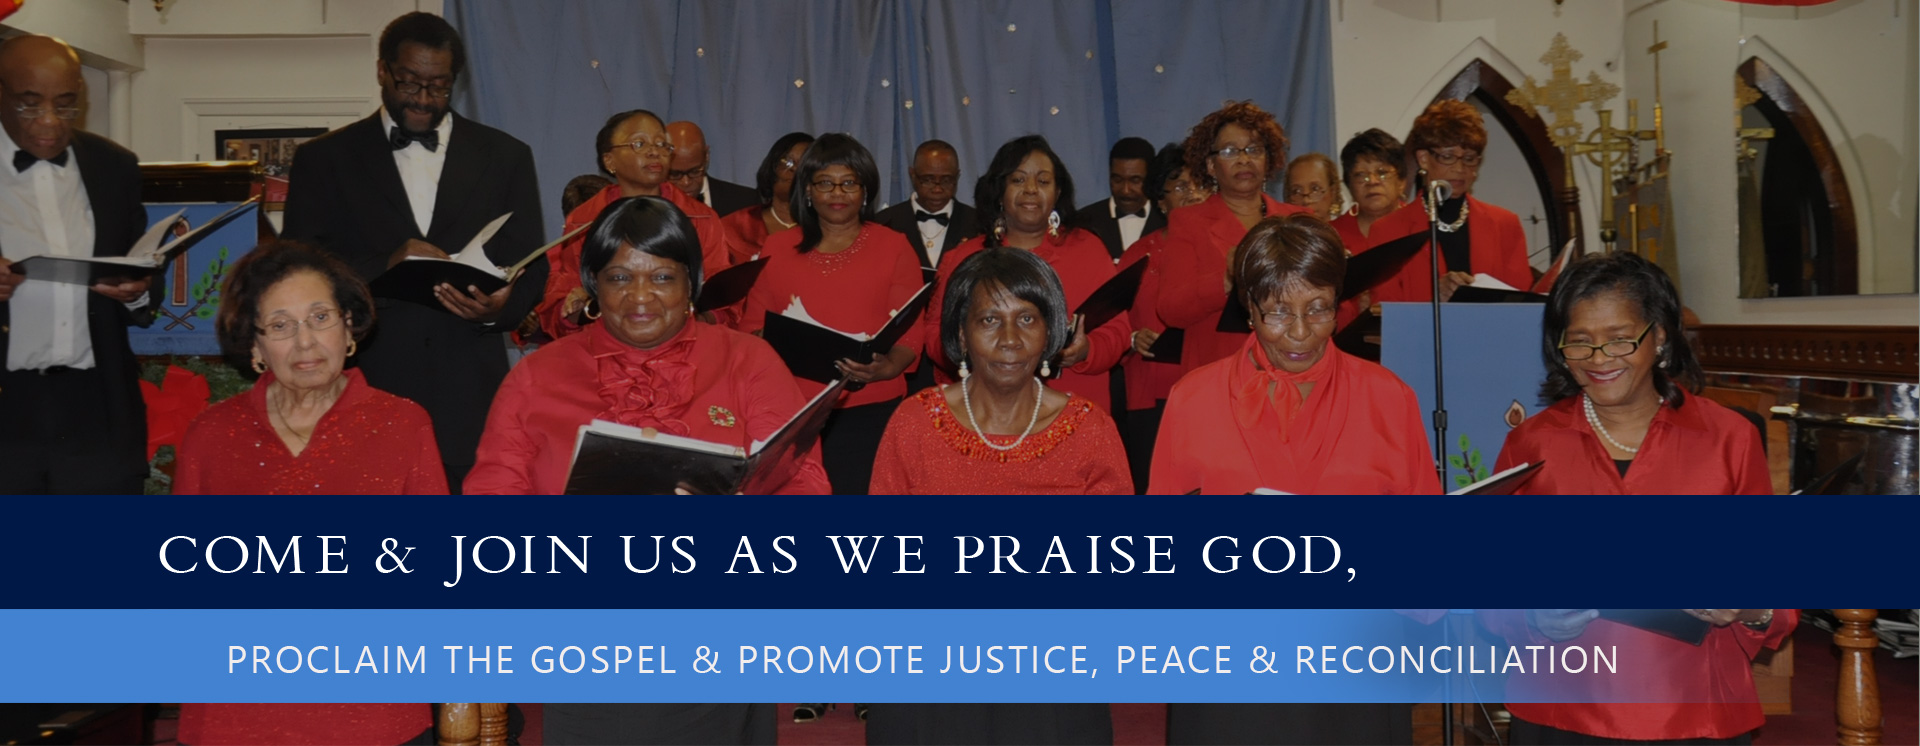 Come & join us as we praise god, proclaim the gospel & promote justice, peace & Reconciliation.